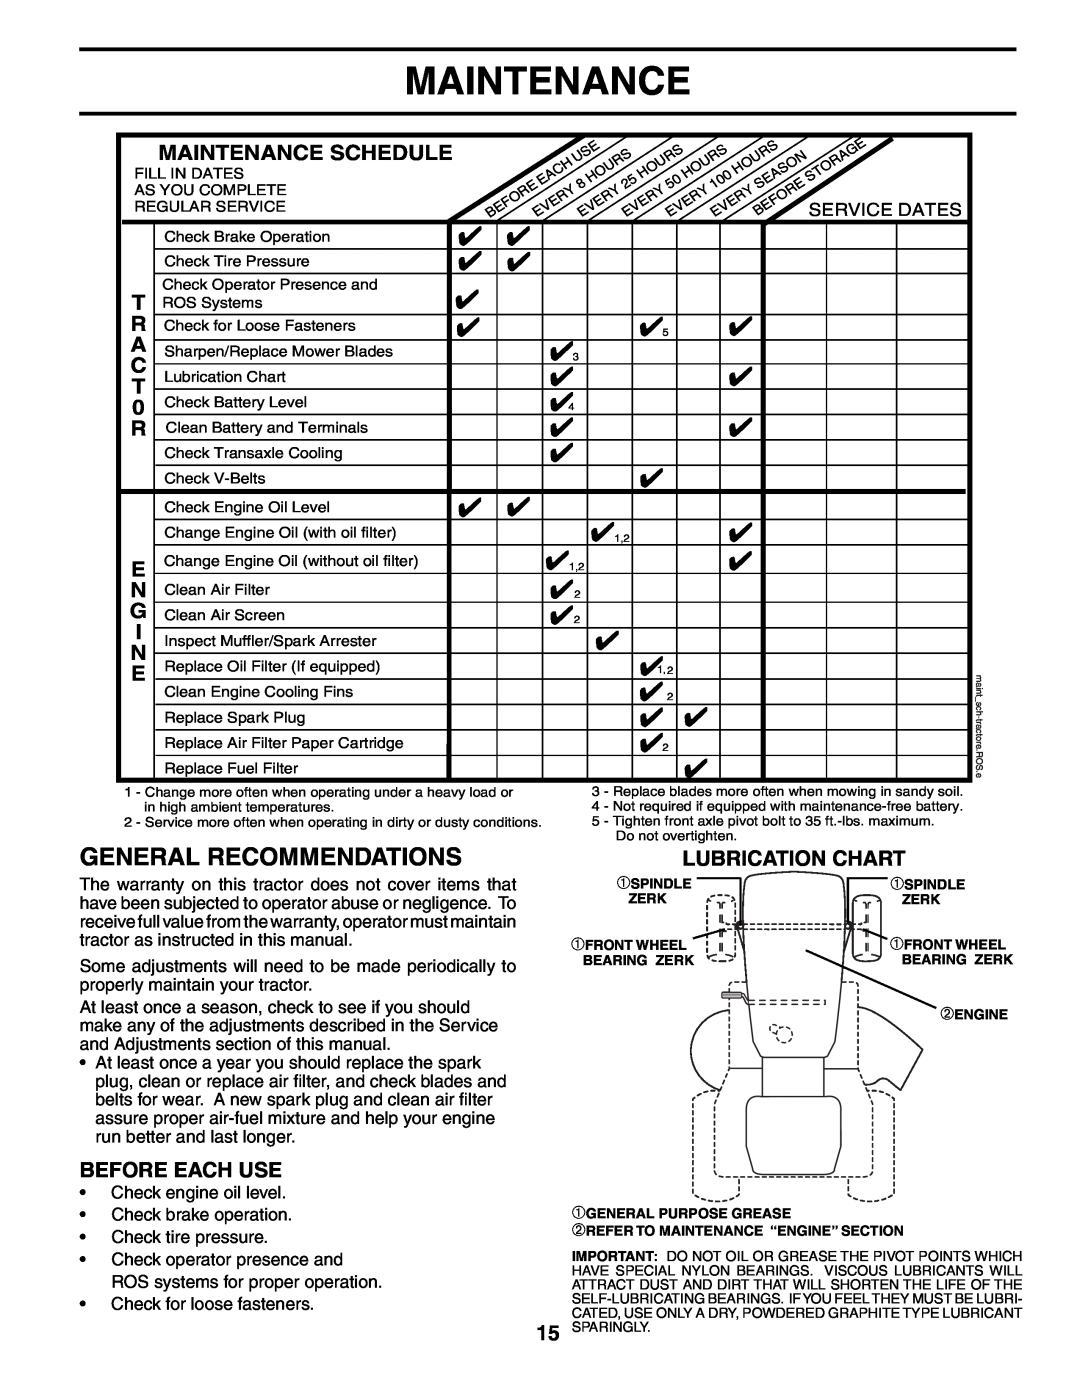 Poulan 195021 manual General Recommendations, Lubrication Chart, Before Each Use, Maintenance Schedule 